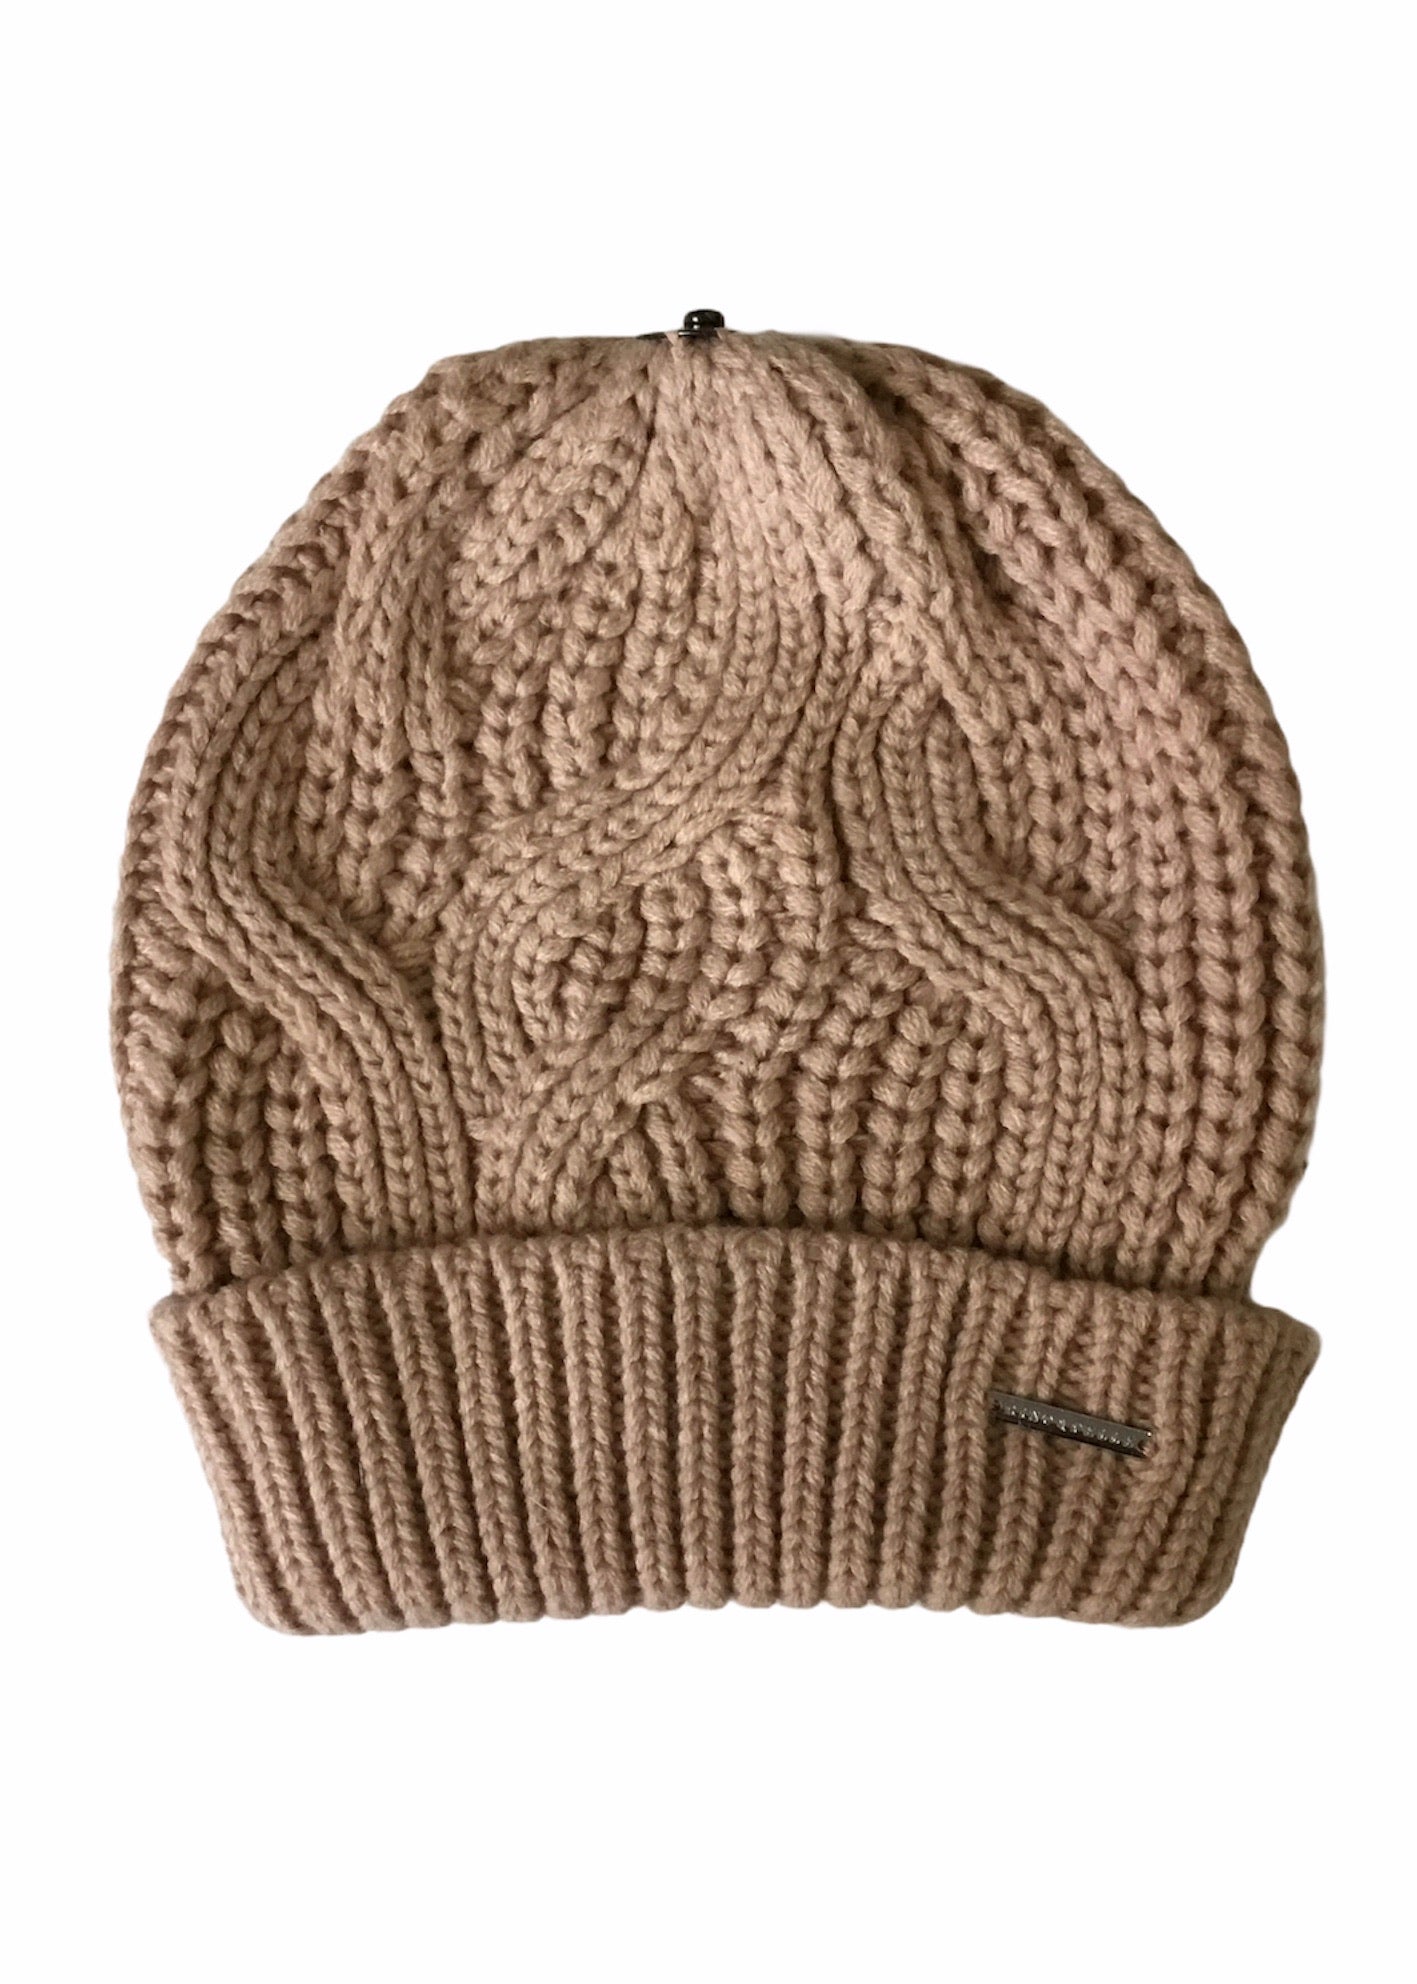 Rino & Pelle - Cable Knit Hat with changeable Pom-Pom’s